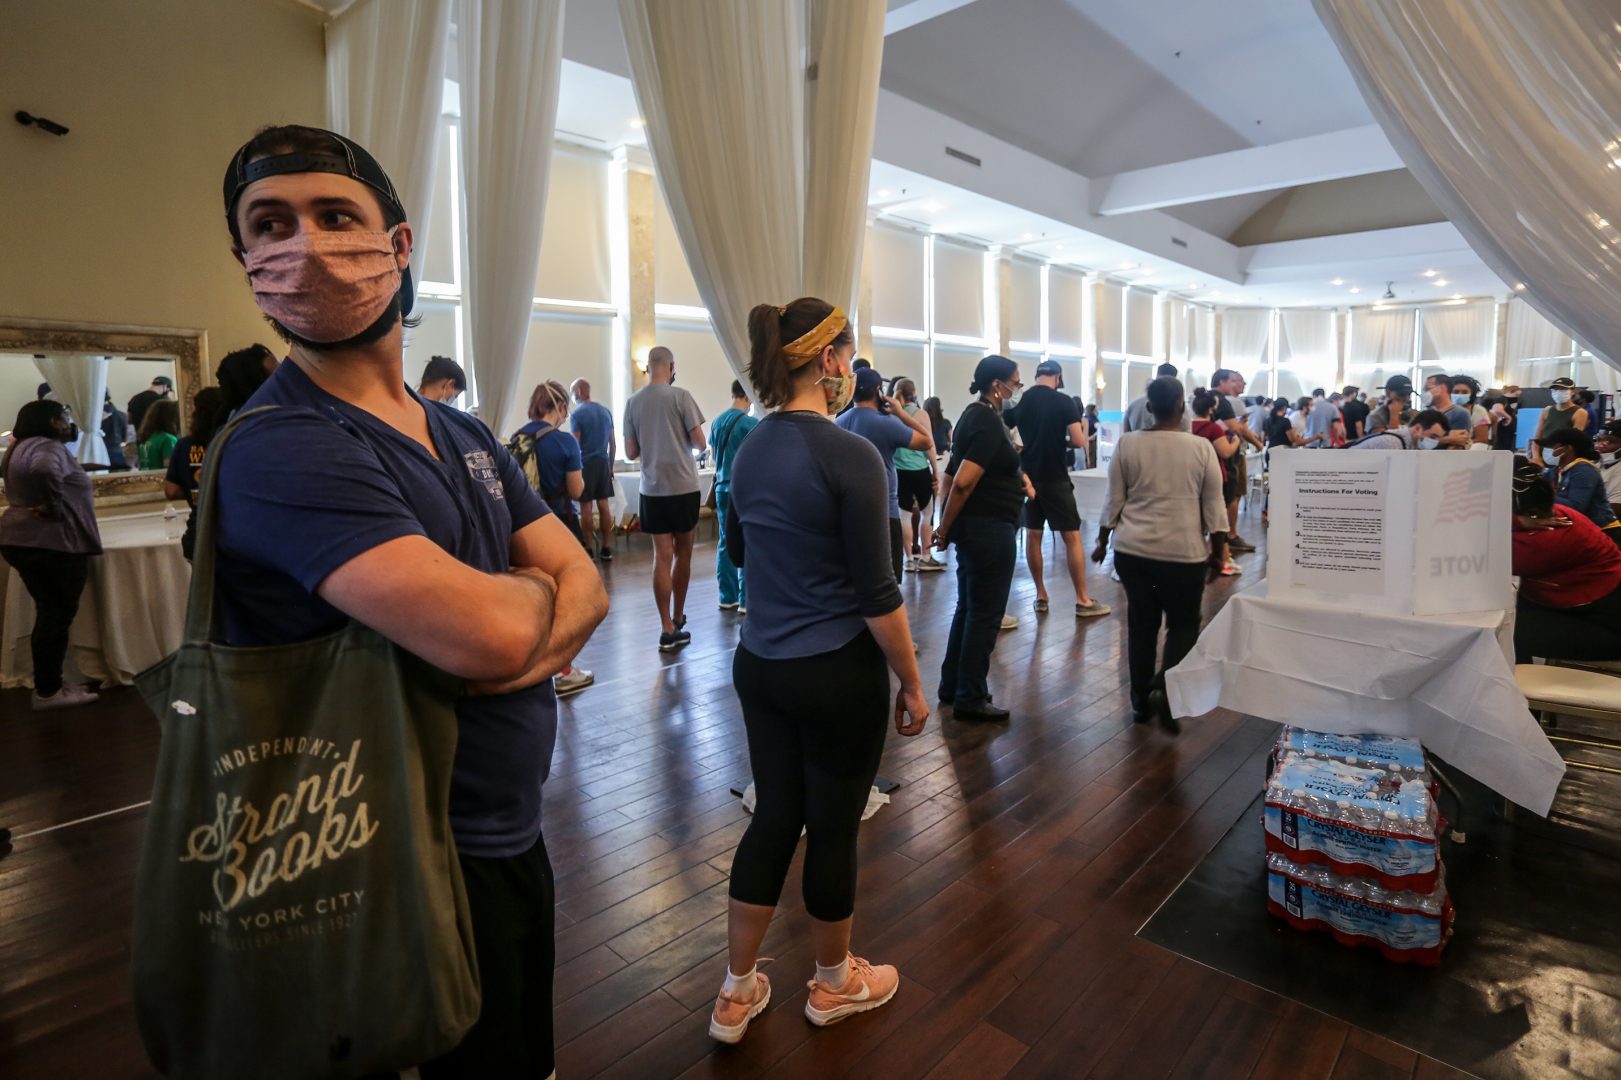 Voters wait in line to cast their ballots in the state's primary election at a polling place, Tuesday, June 9, 2020, in Atlanta.